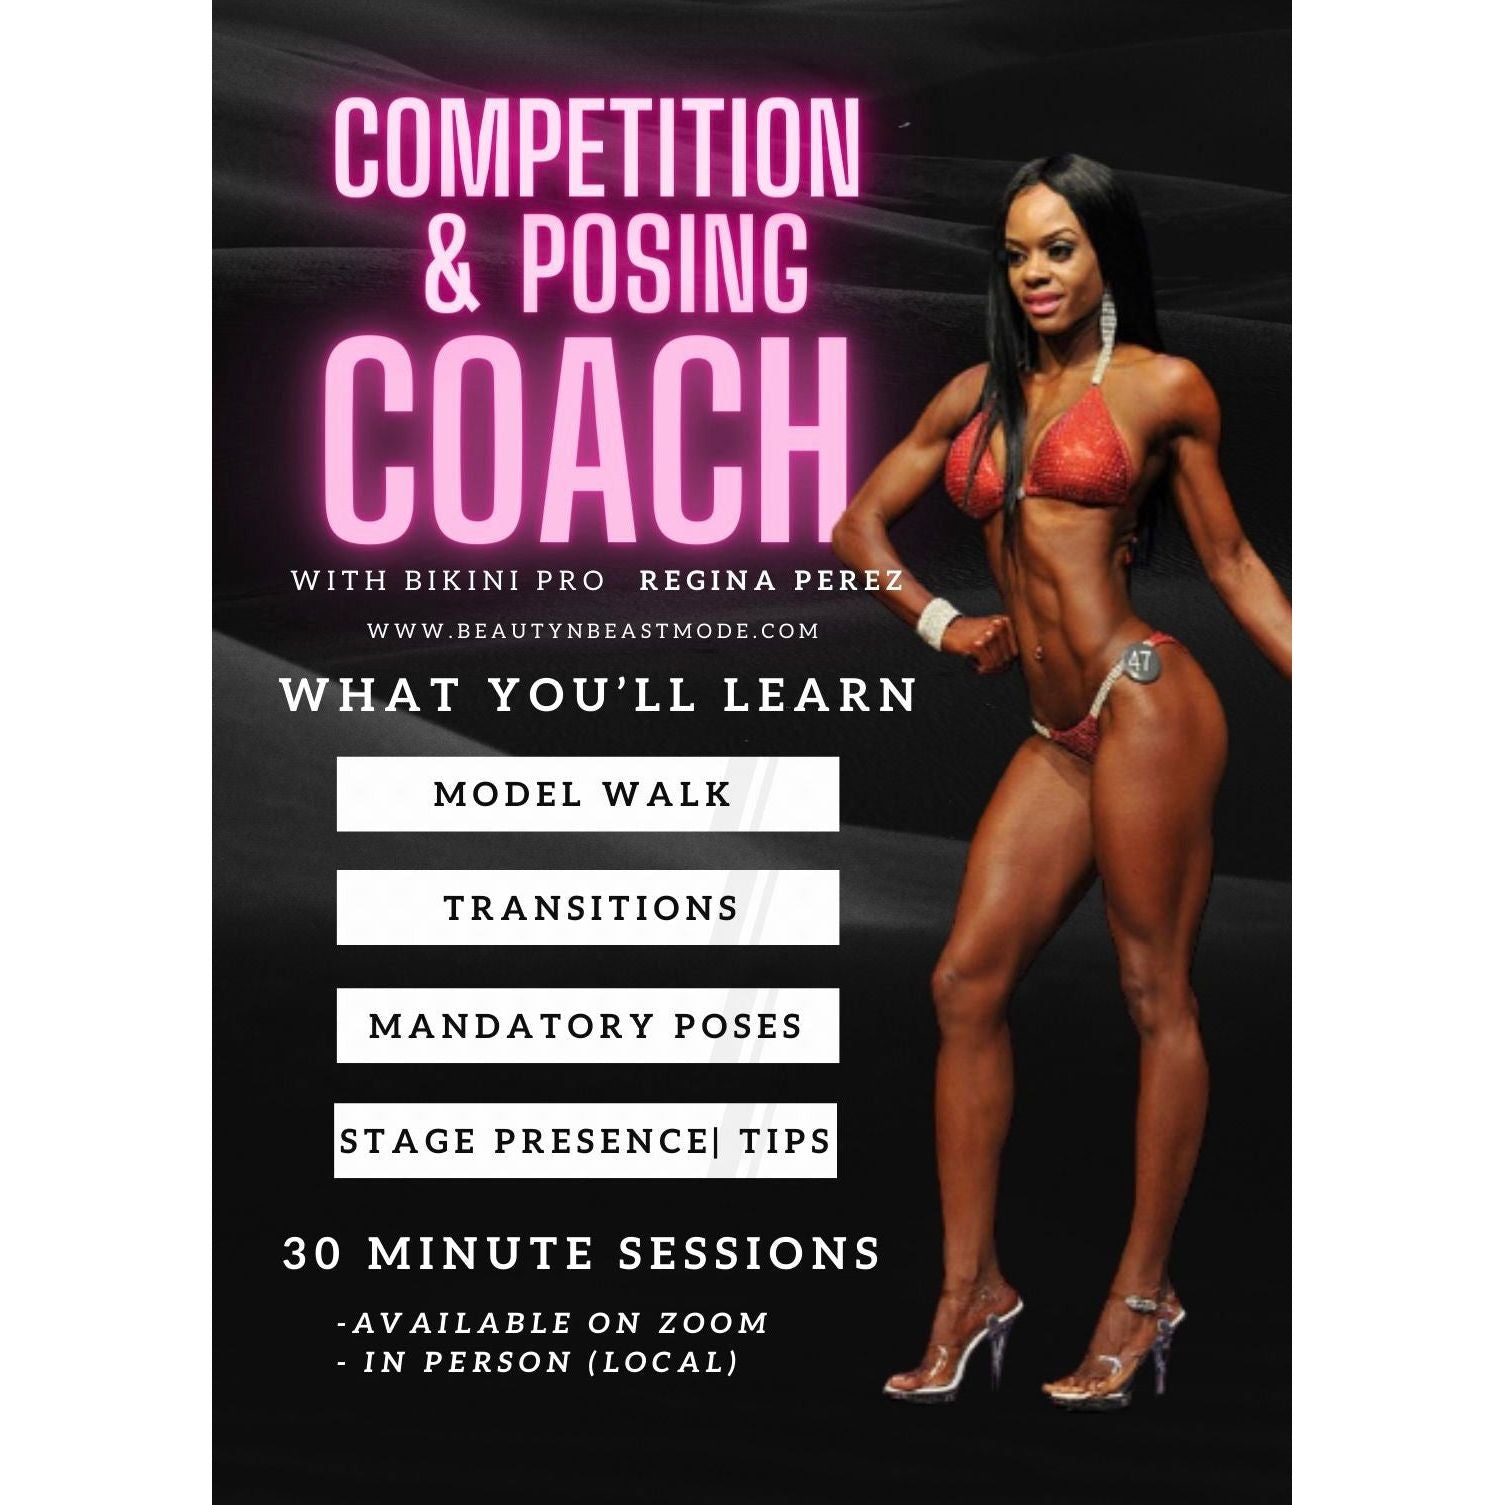 Contest Prep: What To Look For In A Coach - Better Body Sports